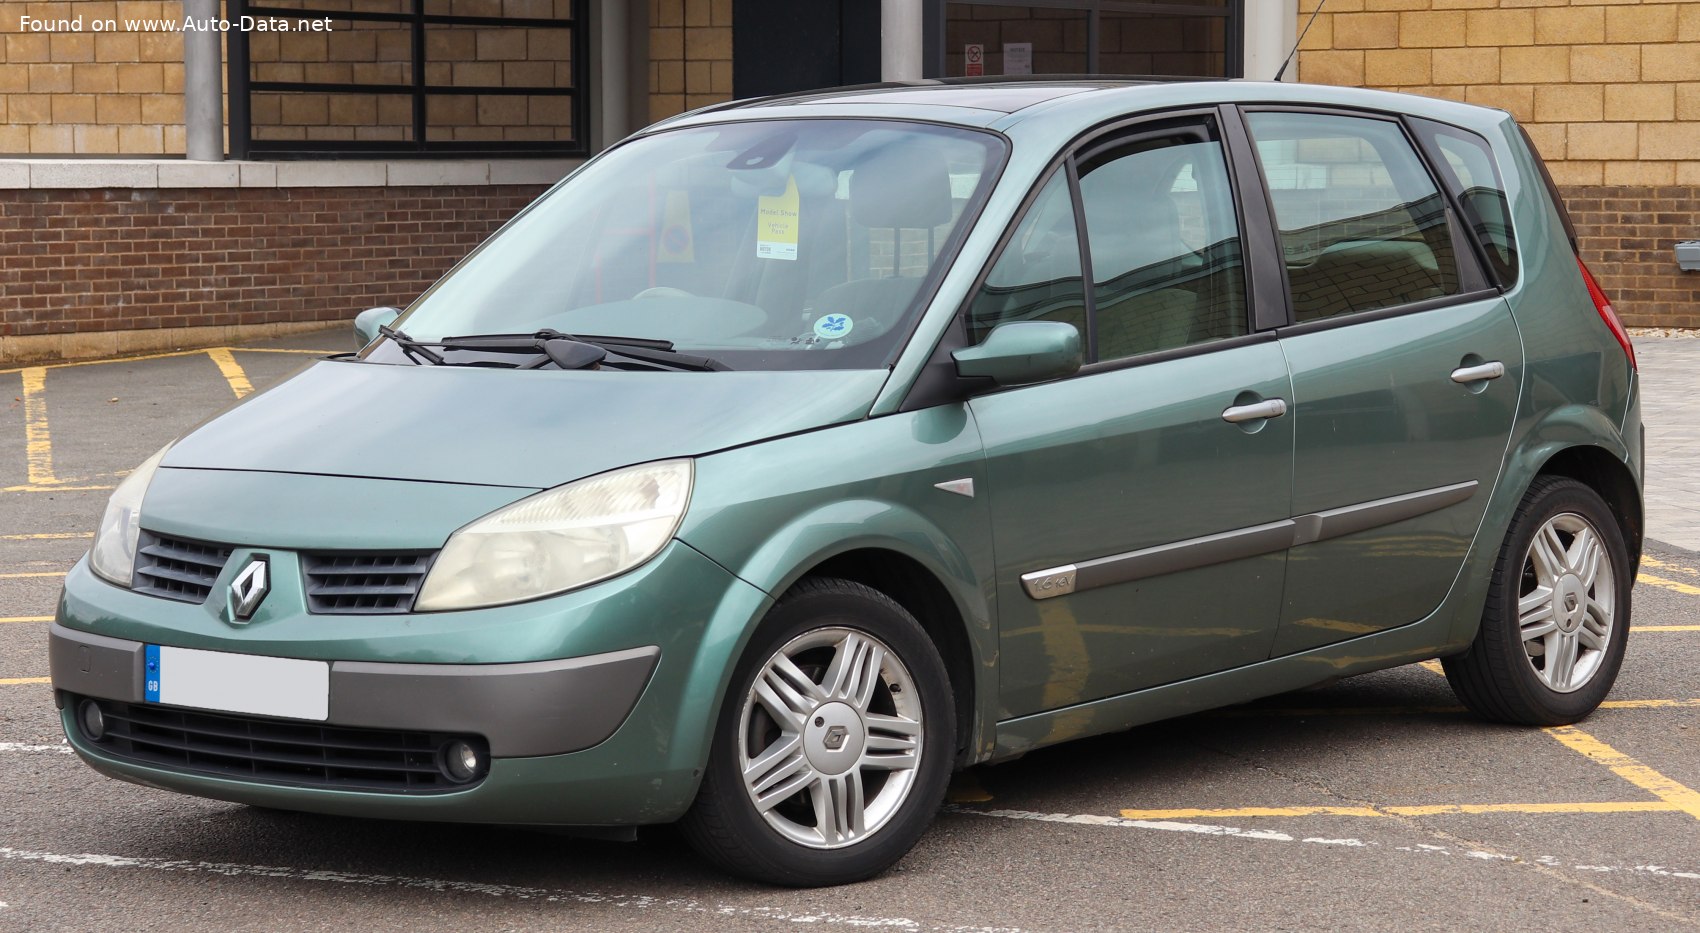 2003 Renault Scenic II (Phase I) 2.0 i 16V (135 Hp)  Technical specs,  data, fuel consumption, Dimensions